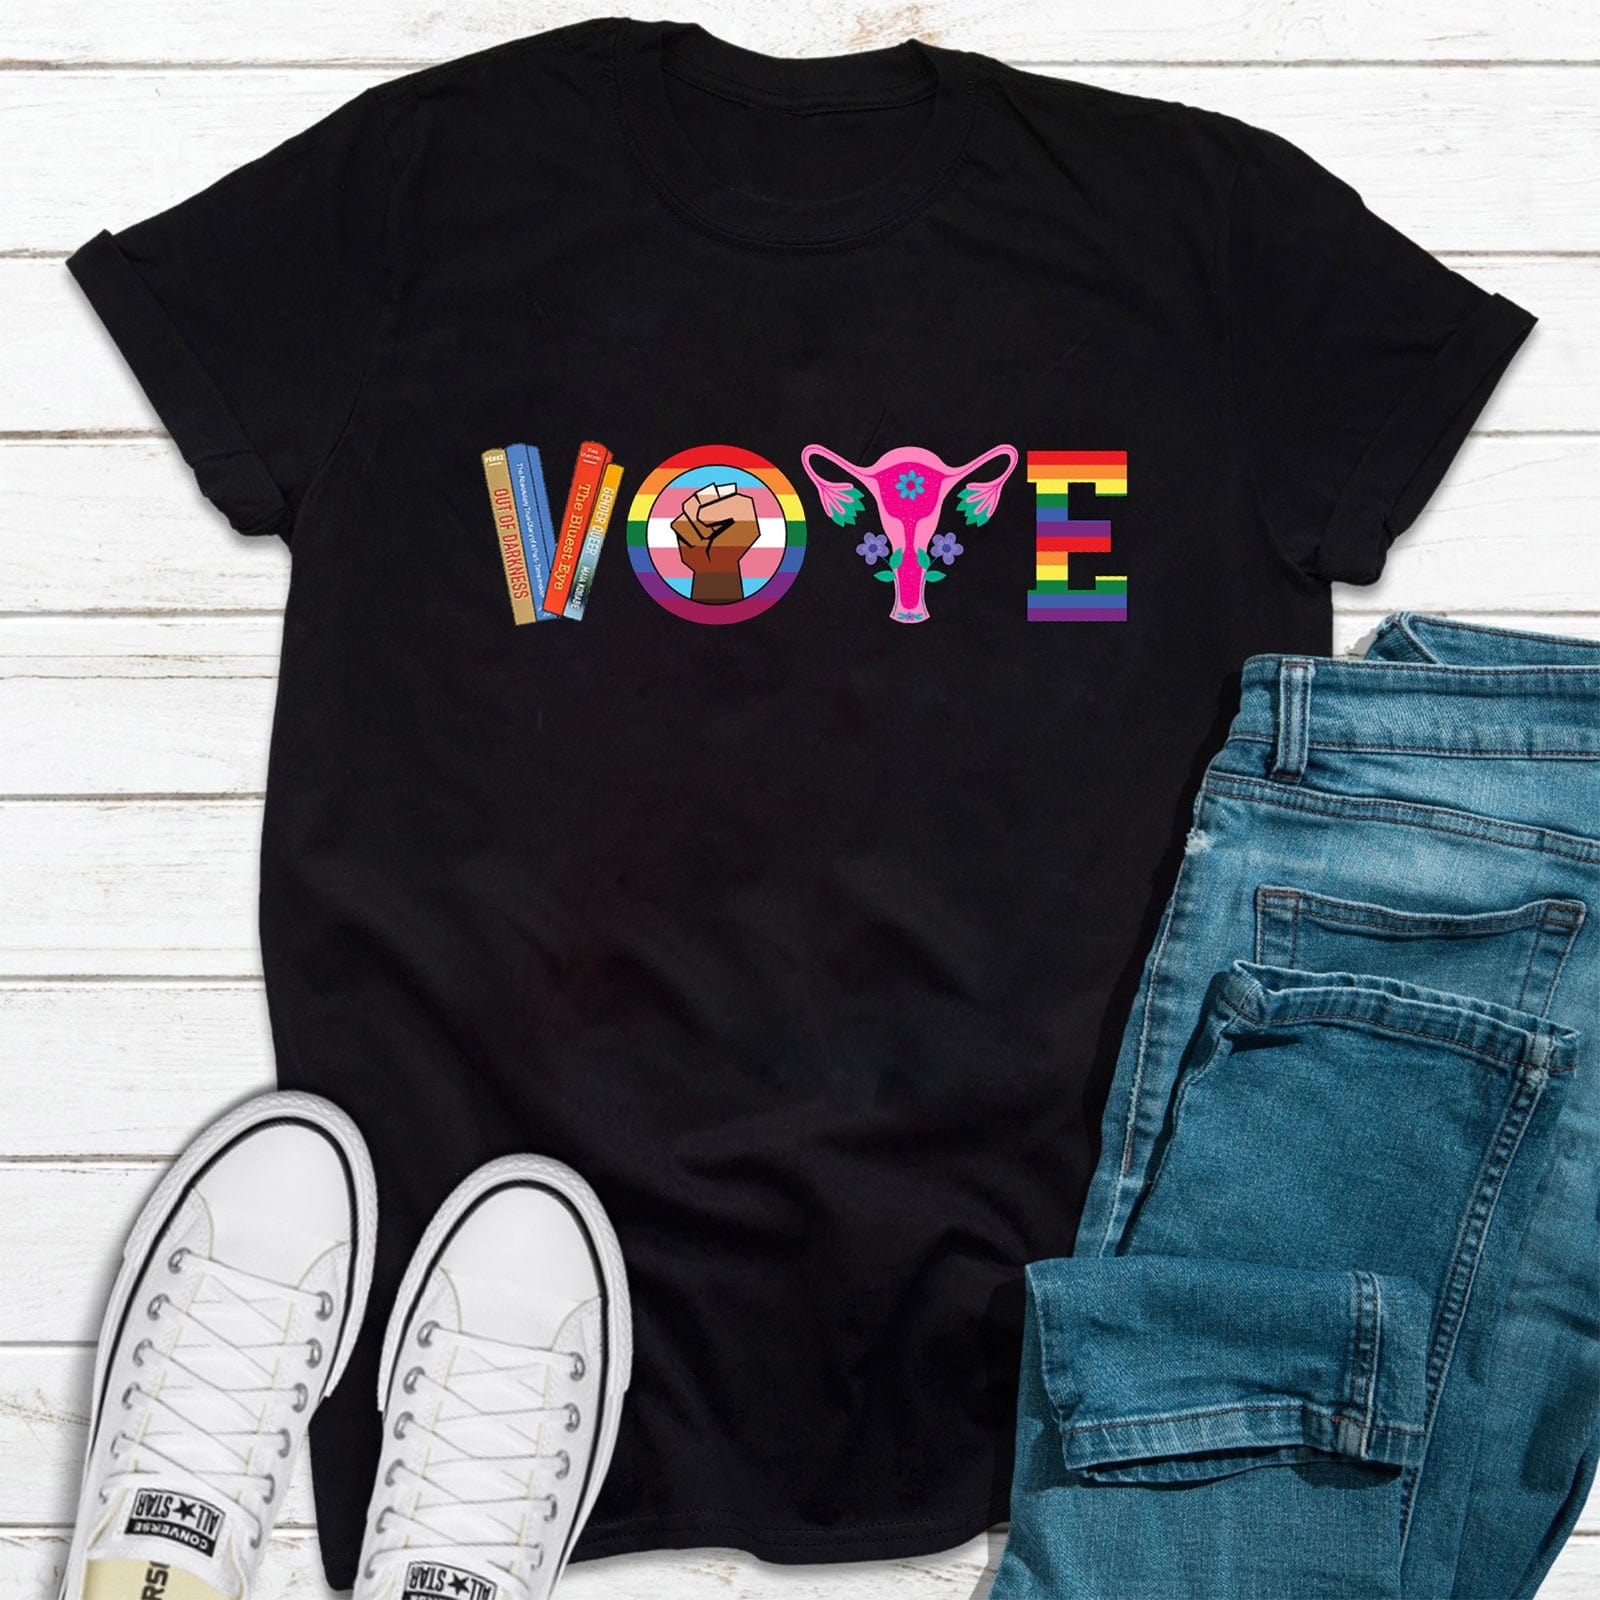 Empowerment Social Justice Icons, Vote Reproductive Rights, LGBT and Banned Book Shirt